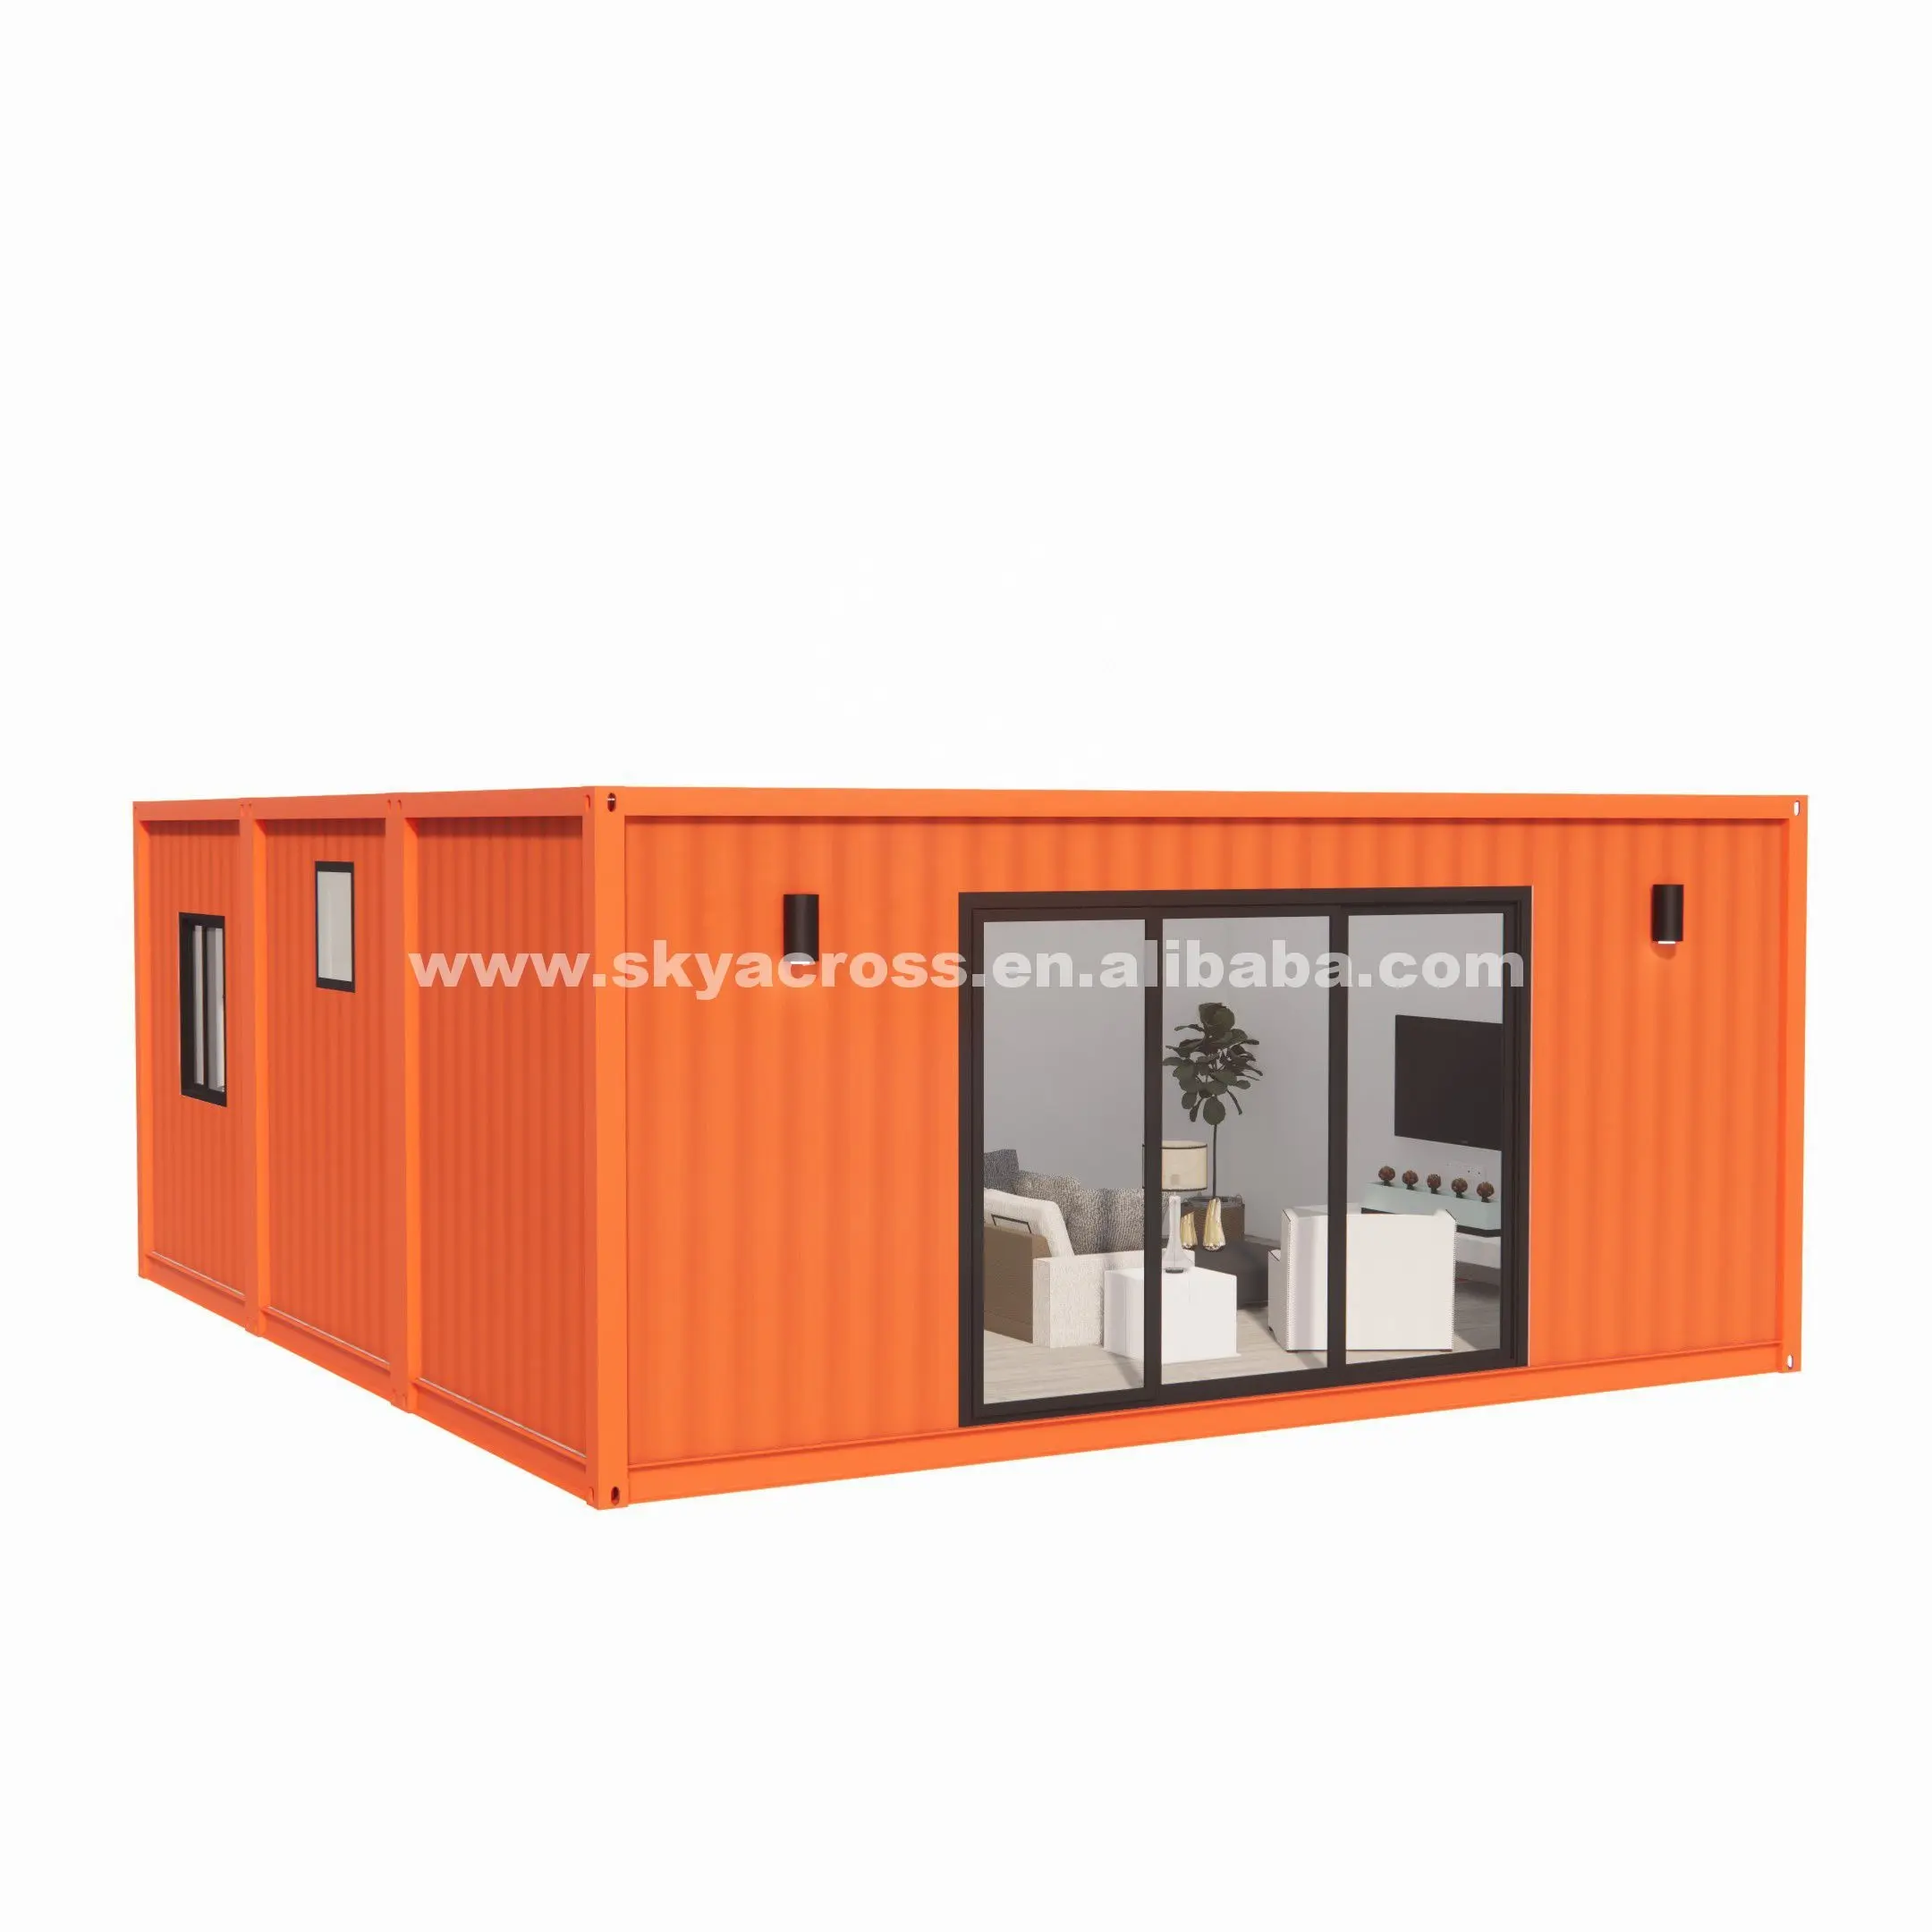 Chinese Prefabricated House Shipping Container Home 20 feet Container Houses Luxury with 2 bedrooms